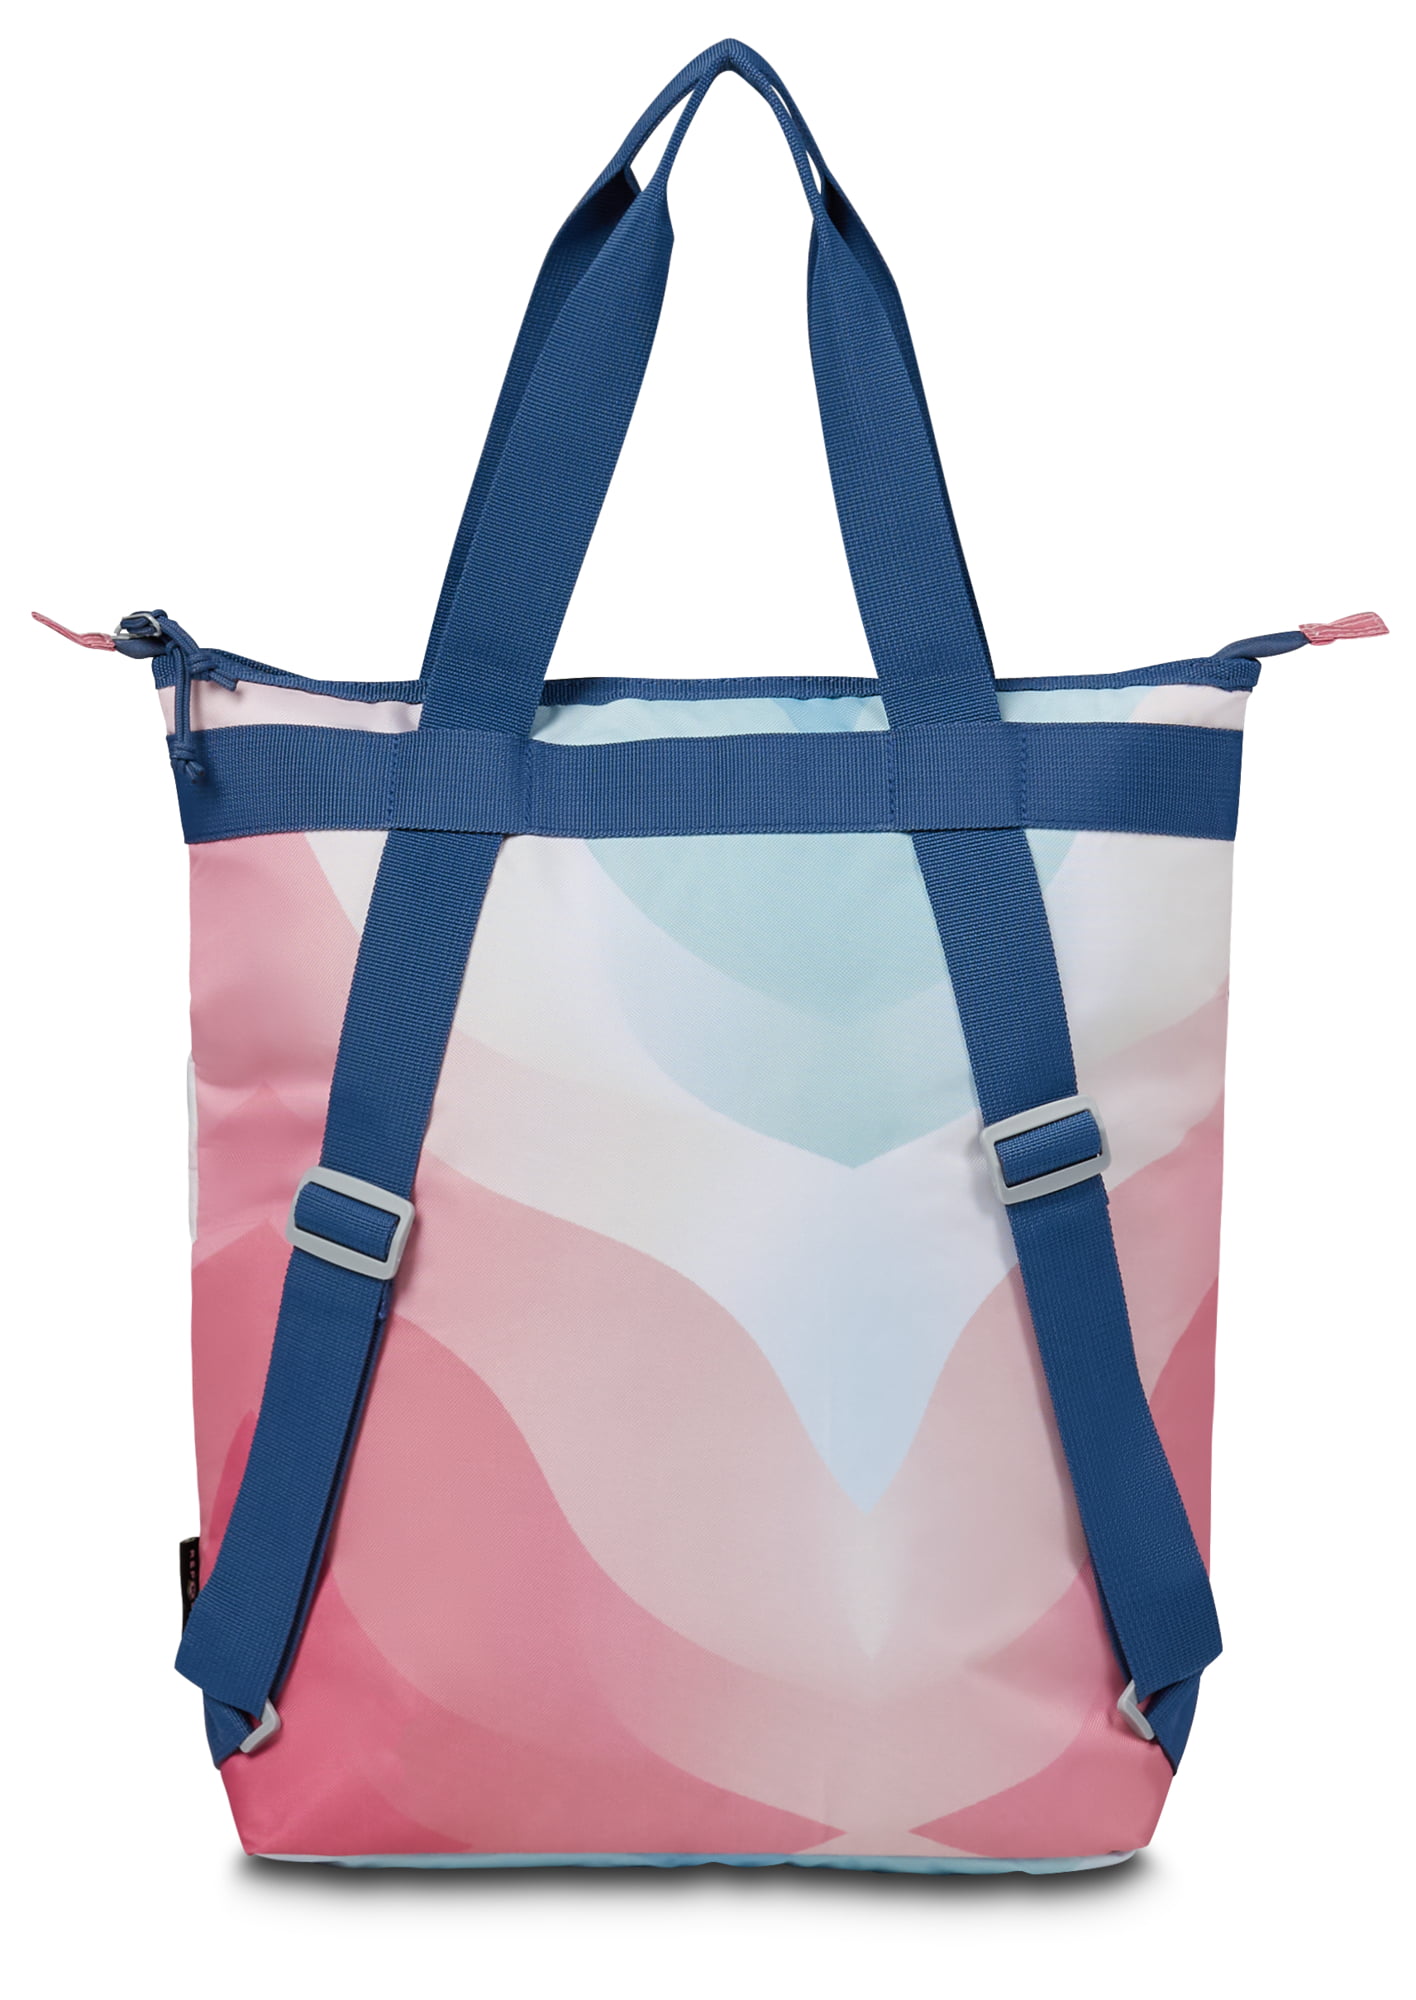 Igloo 15 can Fundamentals Tote soft cooler backpack, gradient haze 